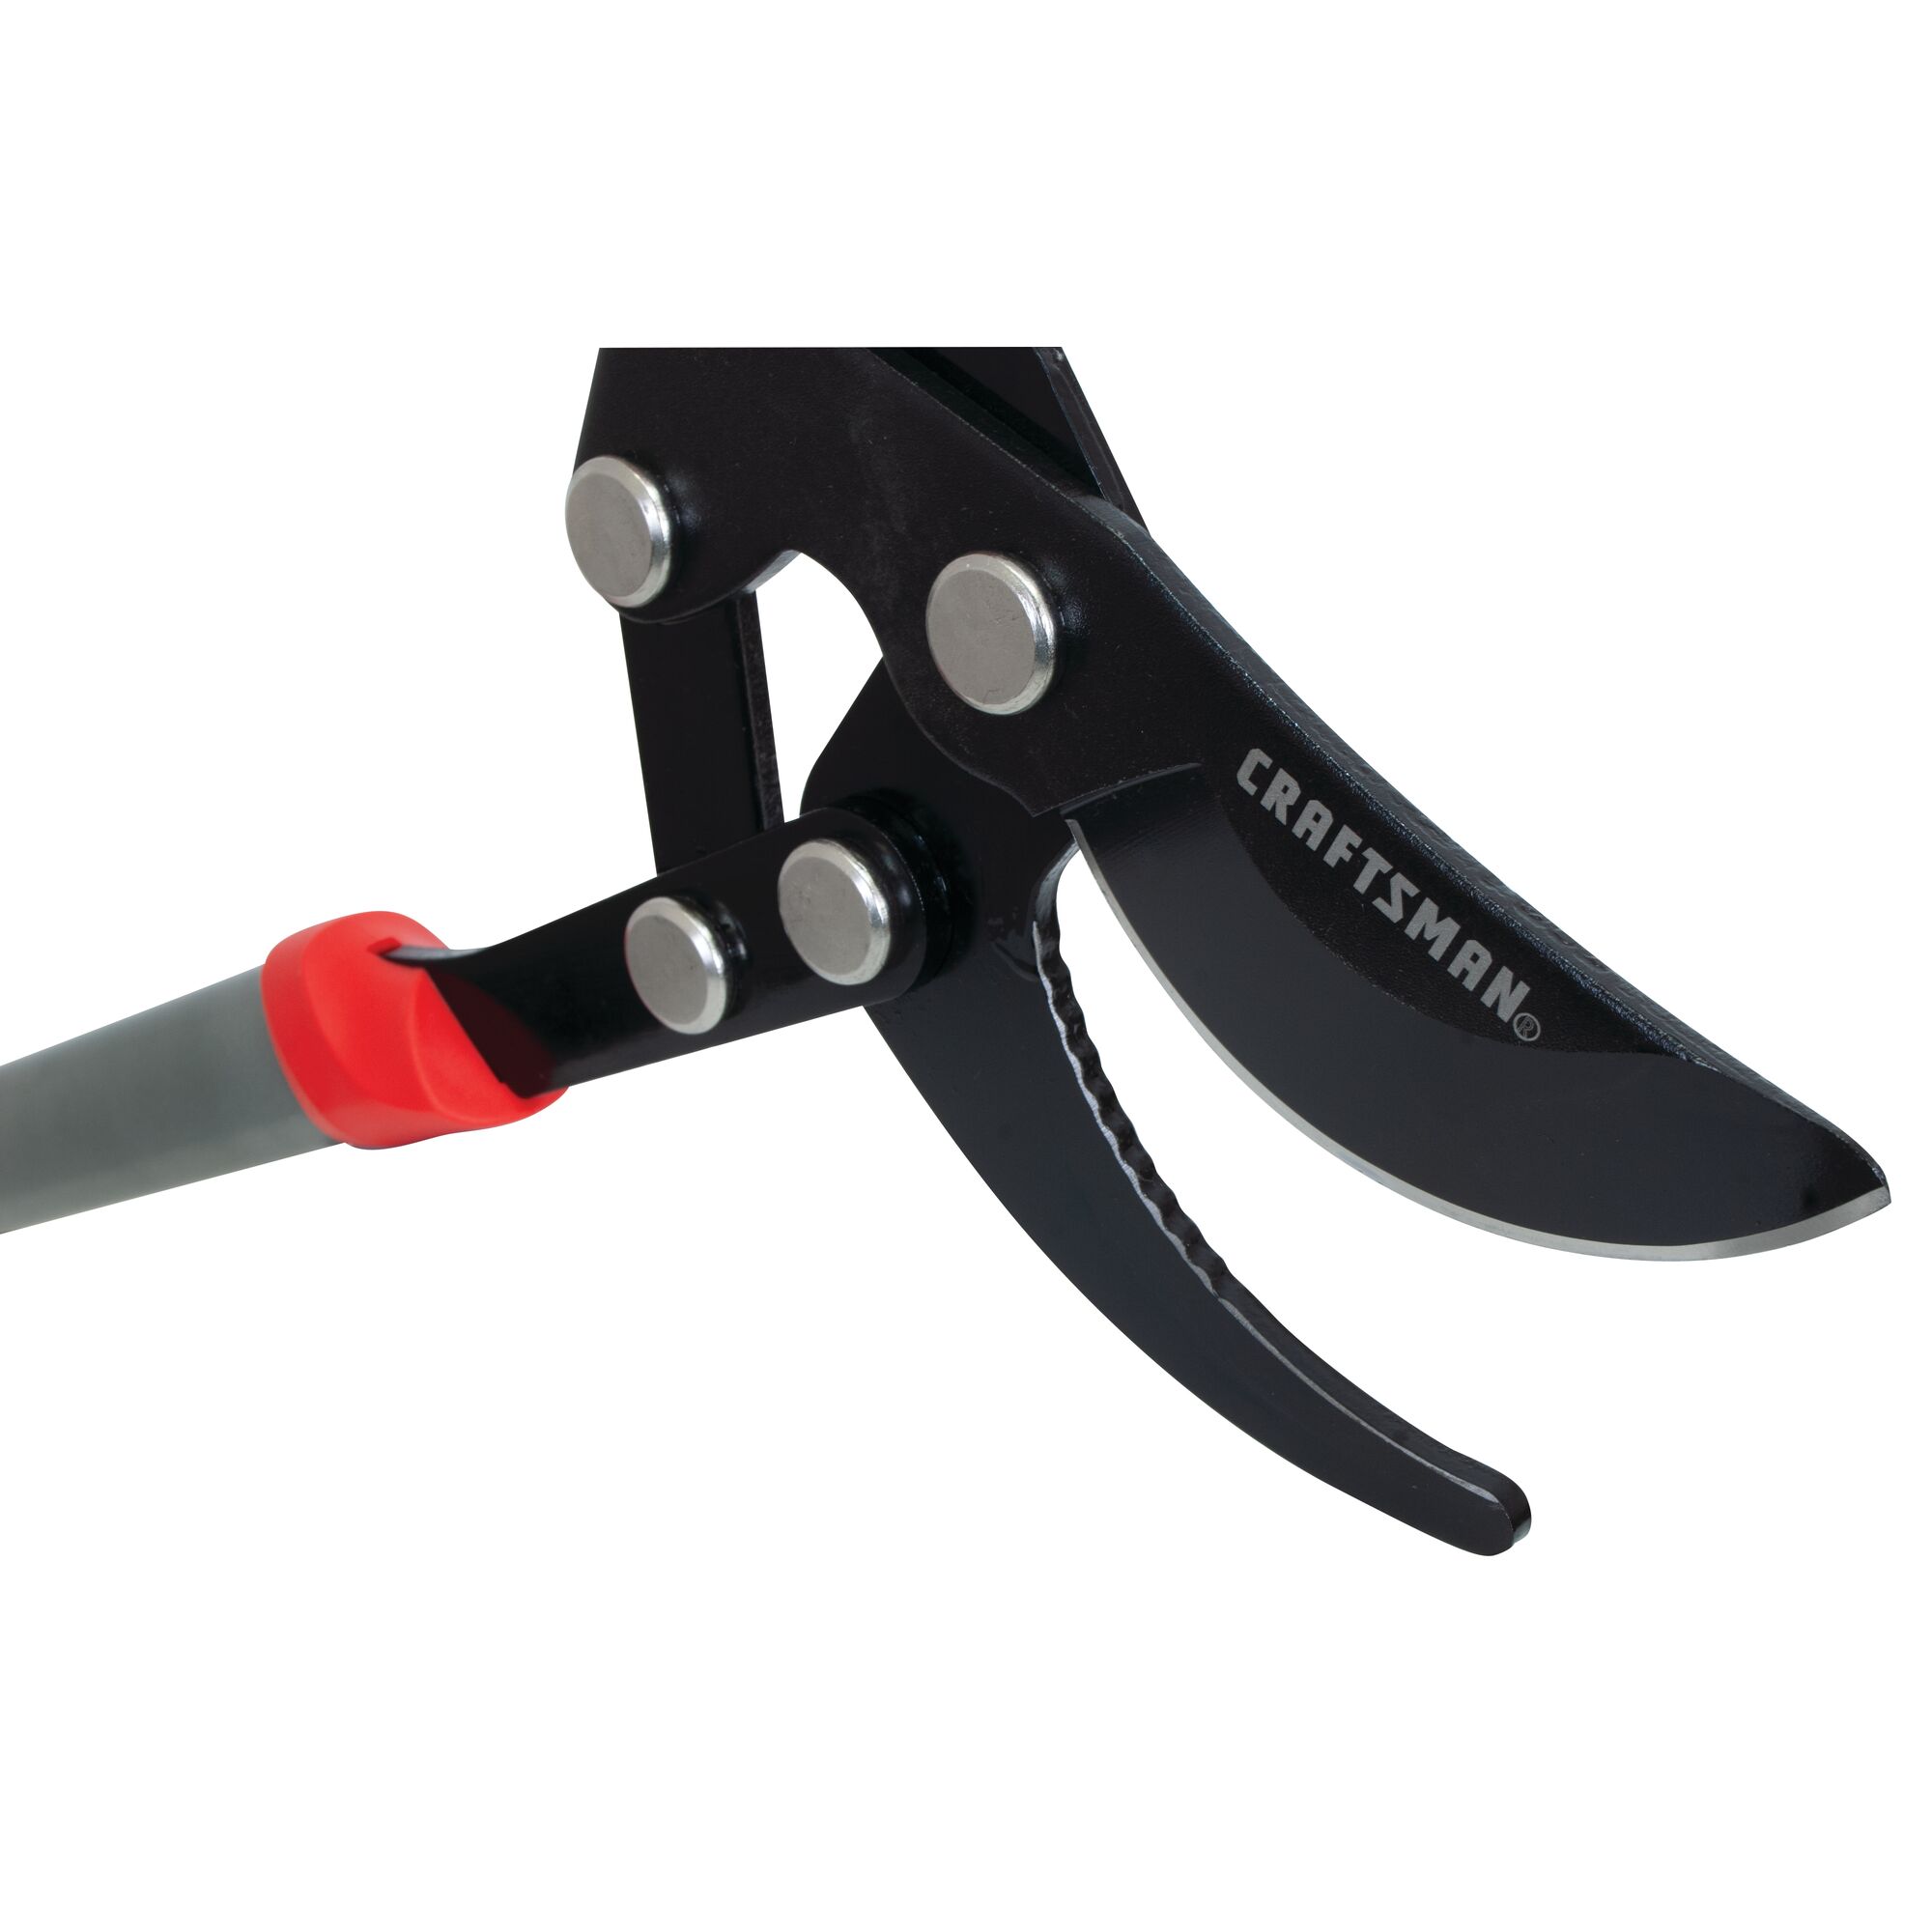 High carbon steel blades with non-stick coating feature of compound bypass lopper.